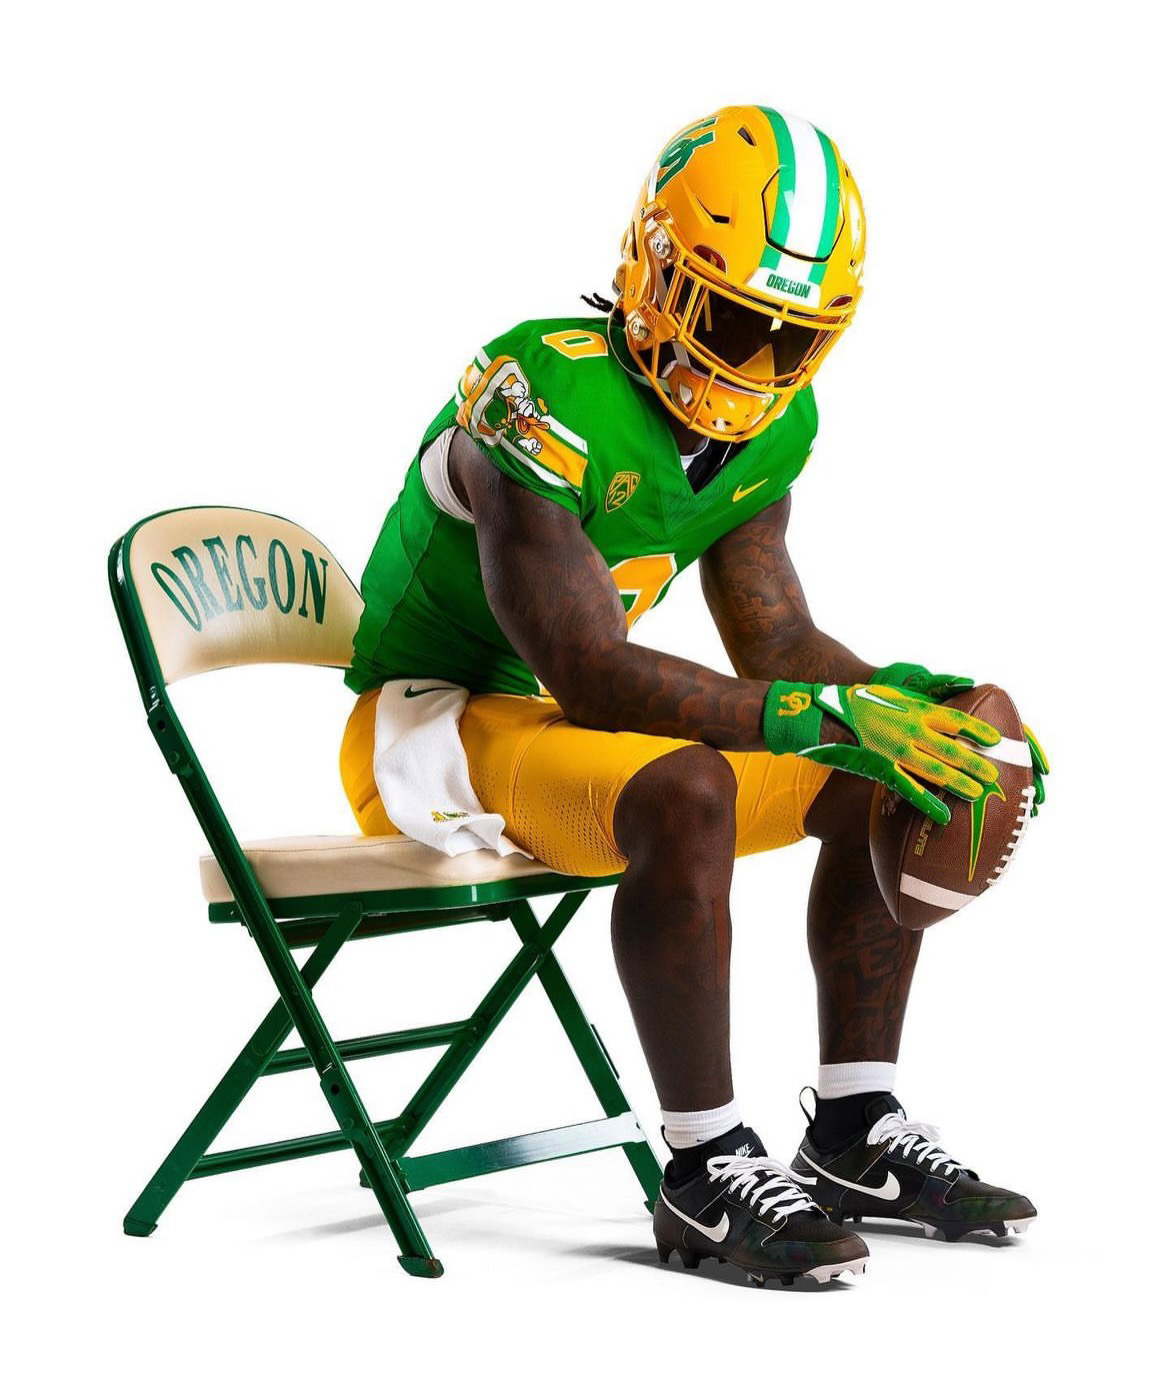 Oregon Ducks to Wear Throwback Uniforms to Honor 20th Anniversary